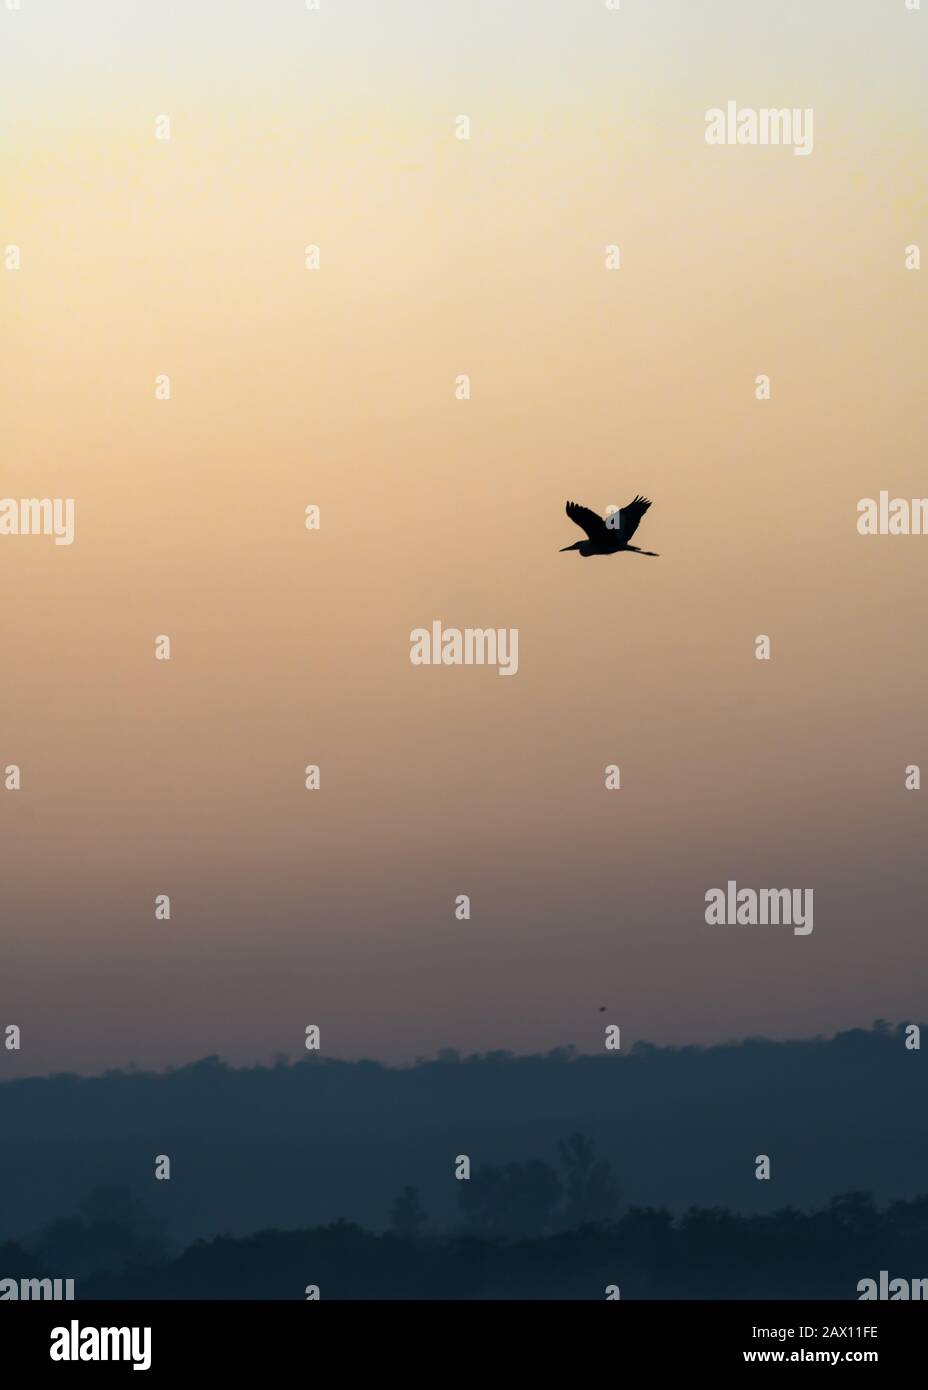 A Silhouette of a bird flying over a beautiful sunrise sky  Stock Photo